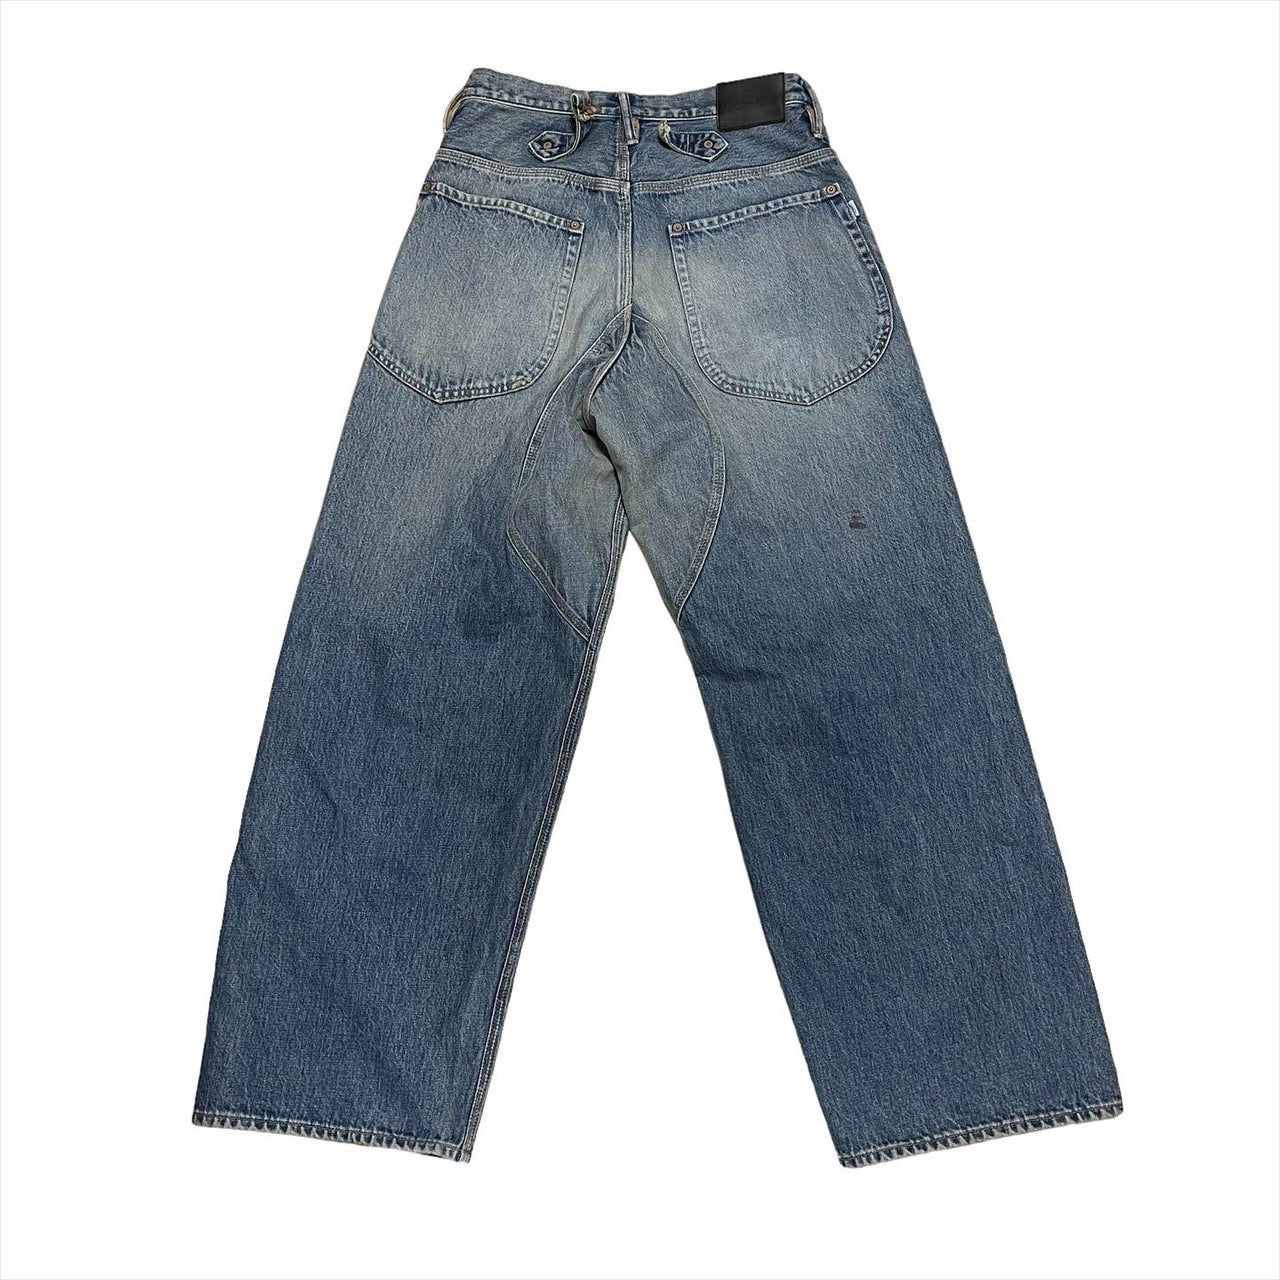 SUGARHILL 22SS FADED DOUBLE KNEE DENIM PANTS PRODUCTED BY UNUSED ...